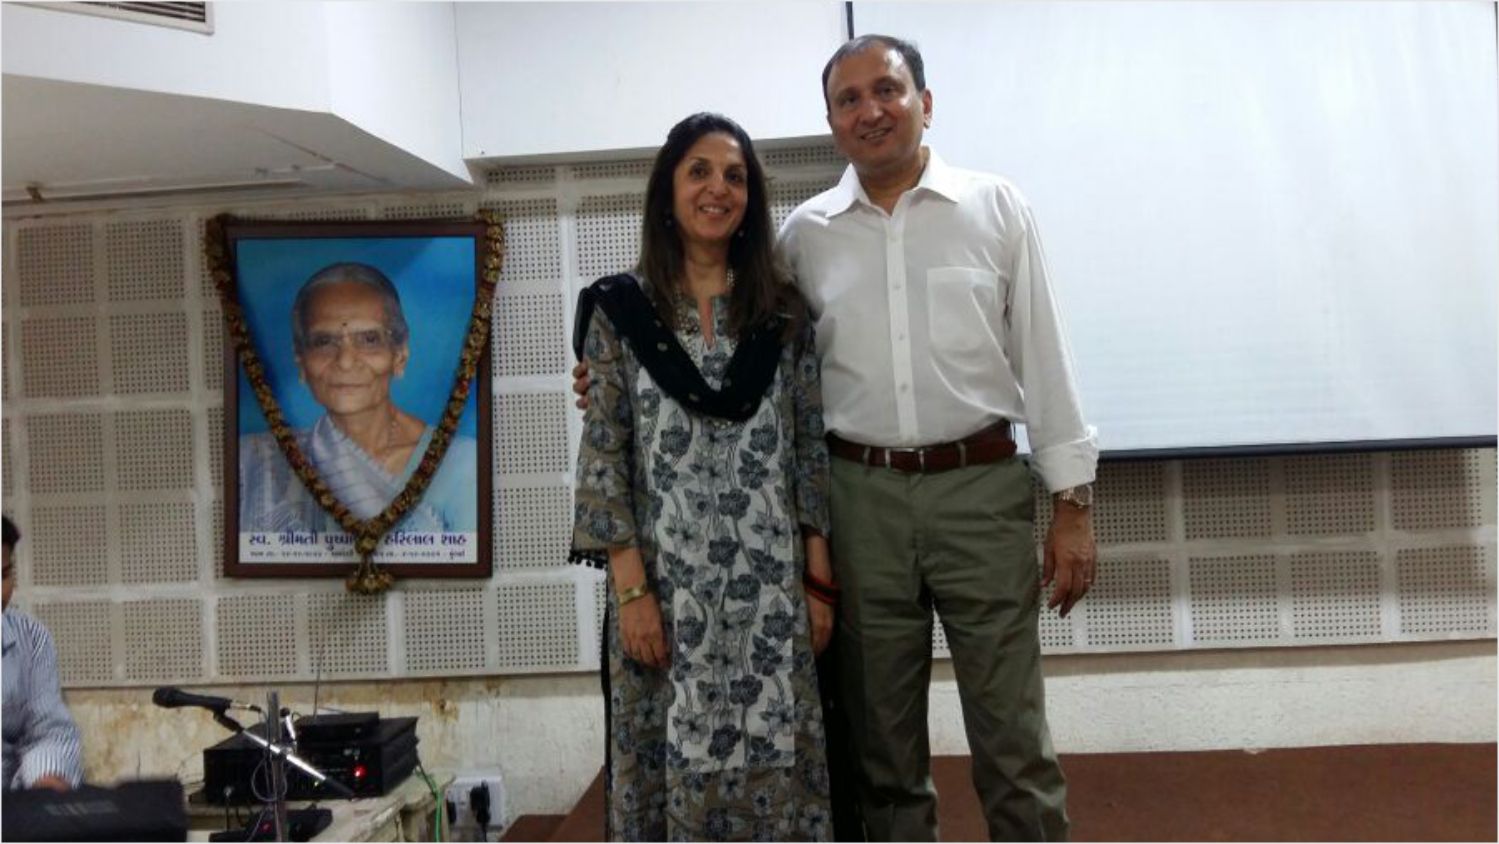  Dr. Sunil Anand and Mrs. Alka Anand (Co-Founders Ananda Wellness)